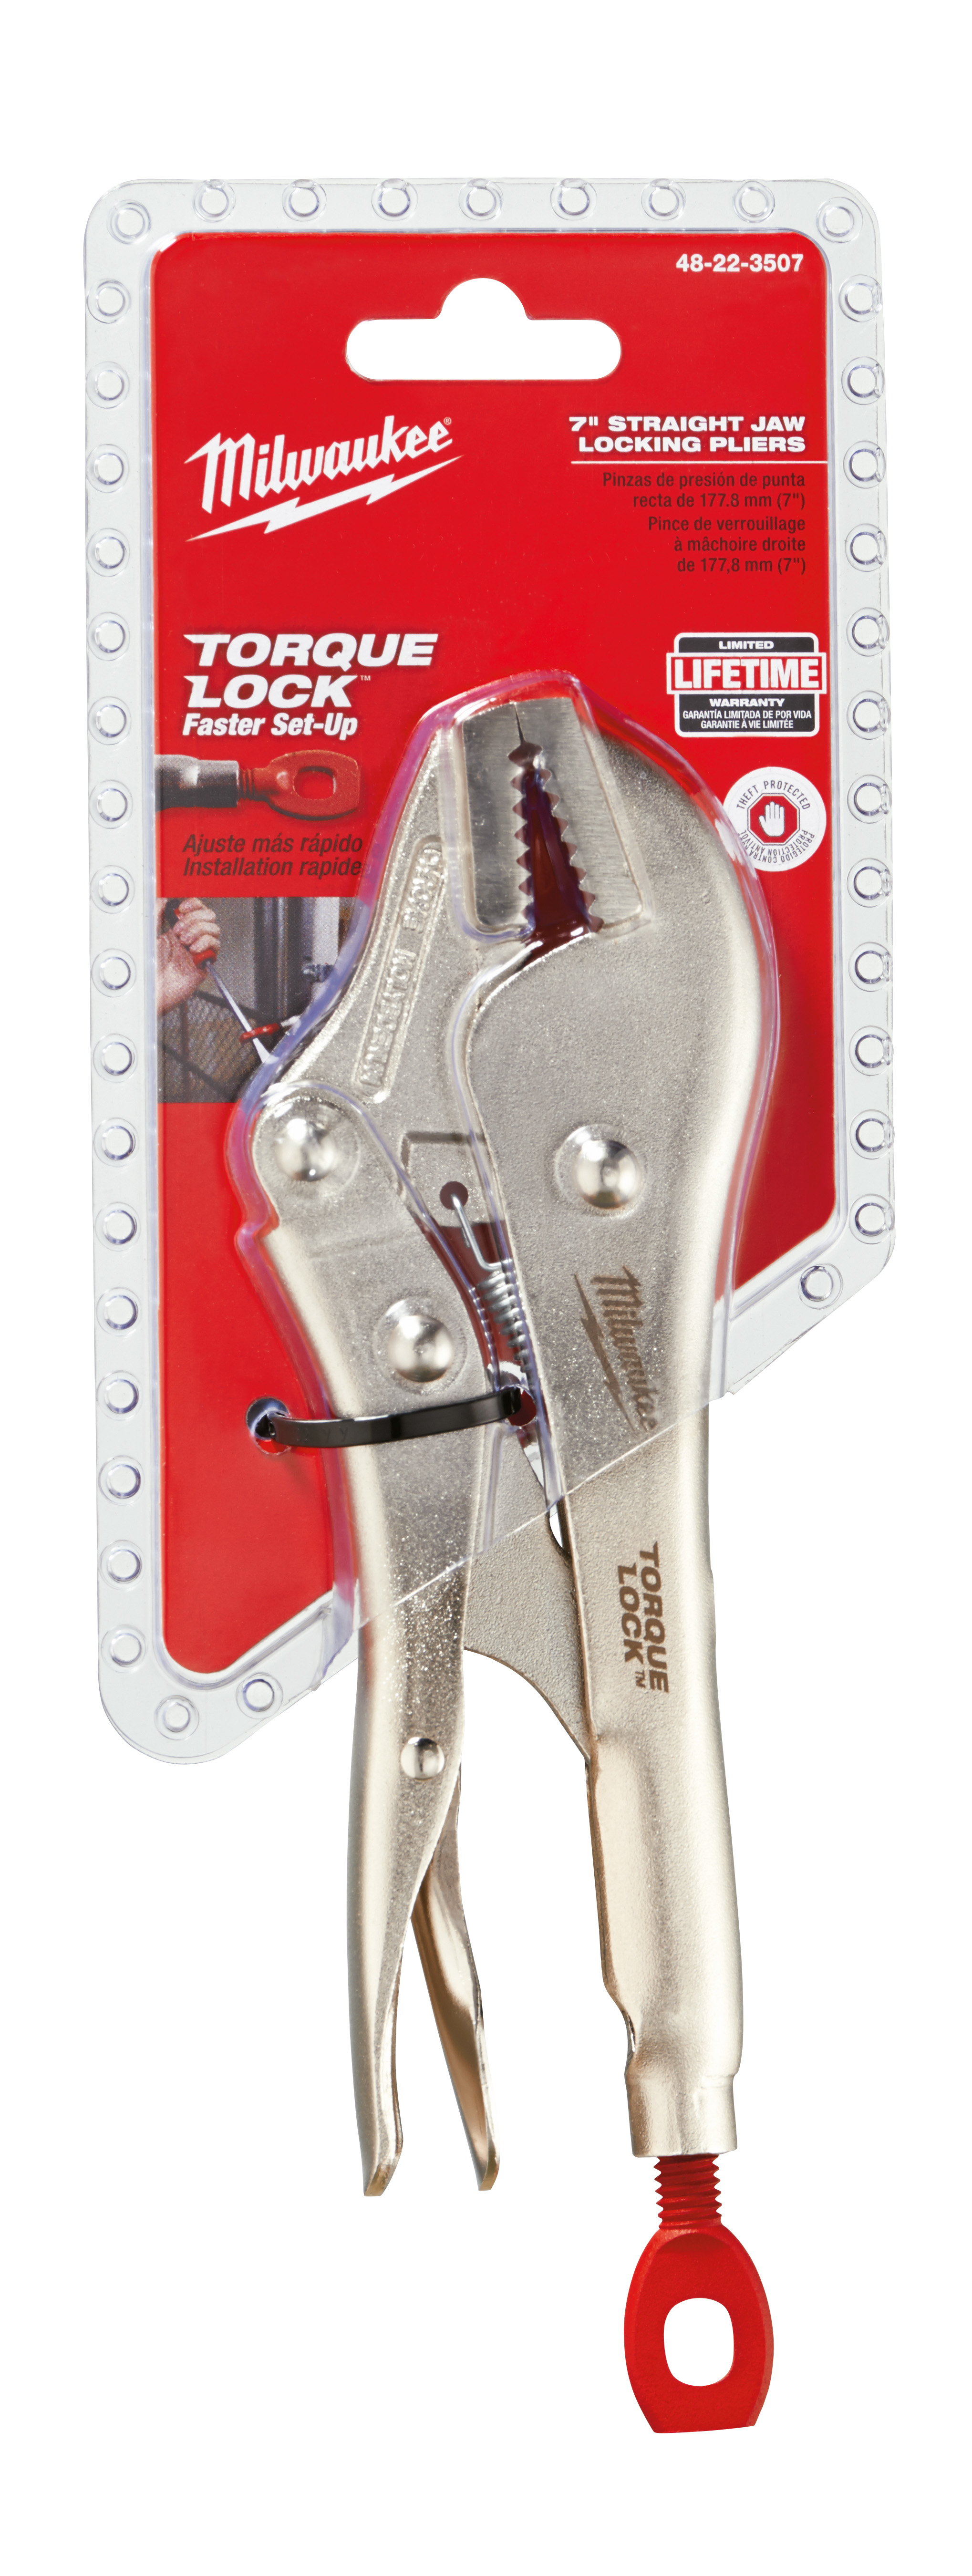 The MILWAUKEE® 7-inch TORQUE LOCK™ Straight Jaw Locking Pliers provides users with faster tool setup and more locking force. The locking pliers' unique thumb screw provides users with a more convenient geometry for hand force while providing clearance to generate more torque with the screwdriver through-hole design. The pliers are made from forged alloy steel for maximum durability with hardened jaws for increased gripping power, perfect for the toughest of jobsites. Milwaukee offers a Limited Lifetime Warranty with all locking tools.